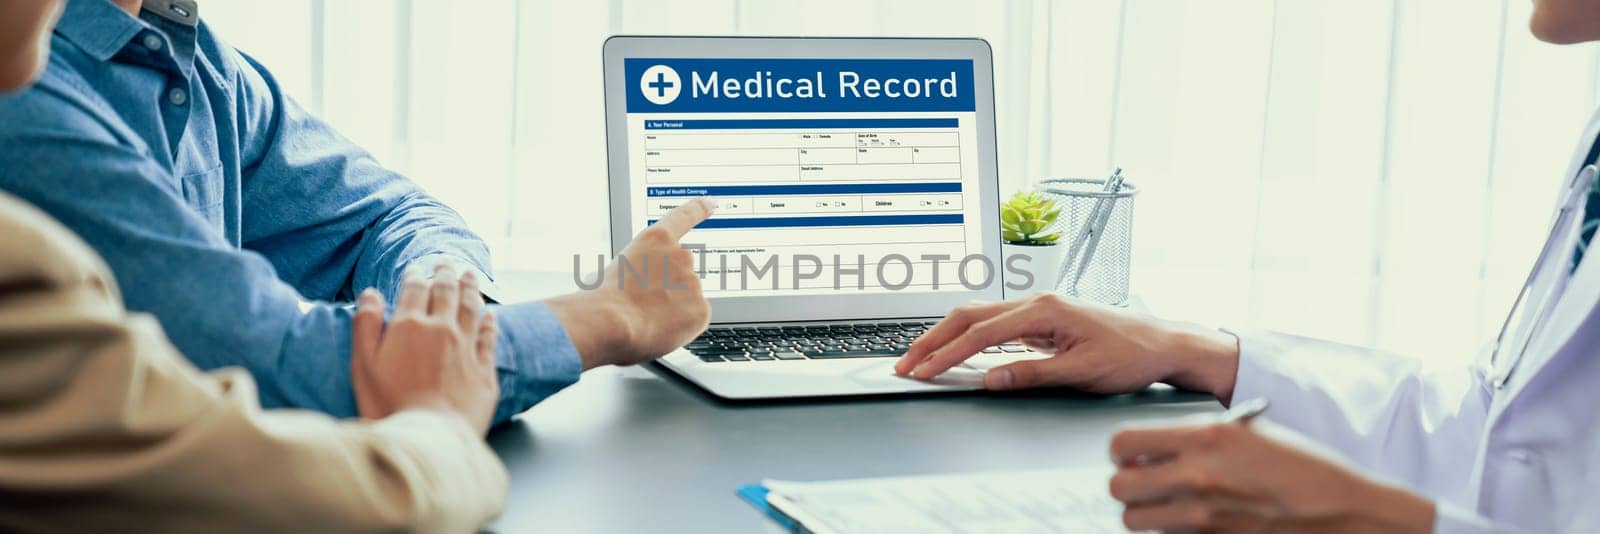 Doctor show medical diagnosis report on laptop and providing compassionate healthcare consultation while young couple patient holding hand and support each other in doctor clinic office. Neoteric